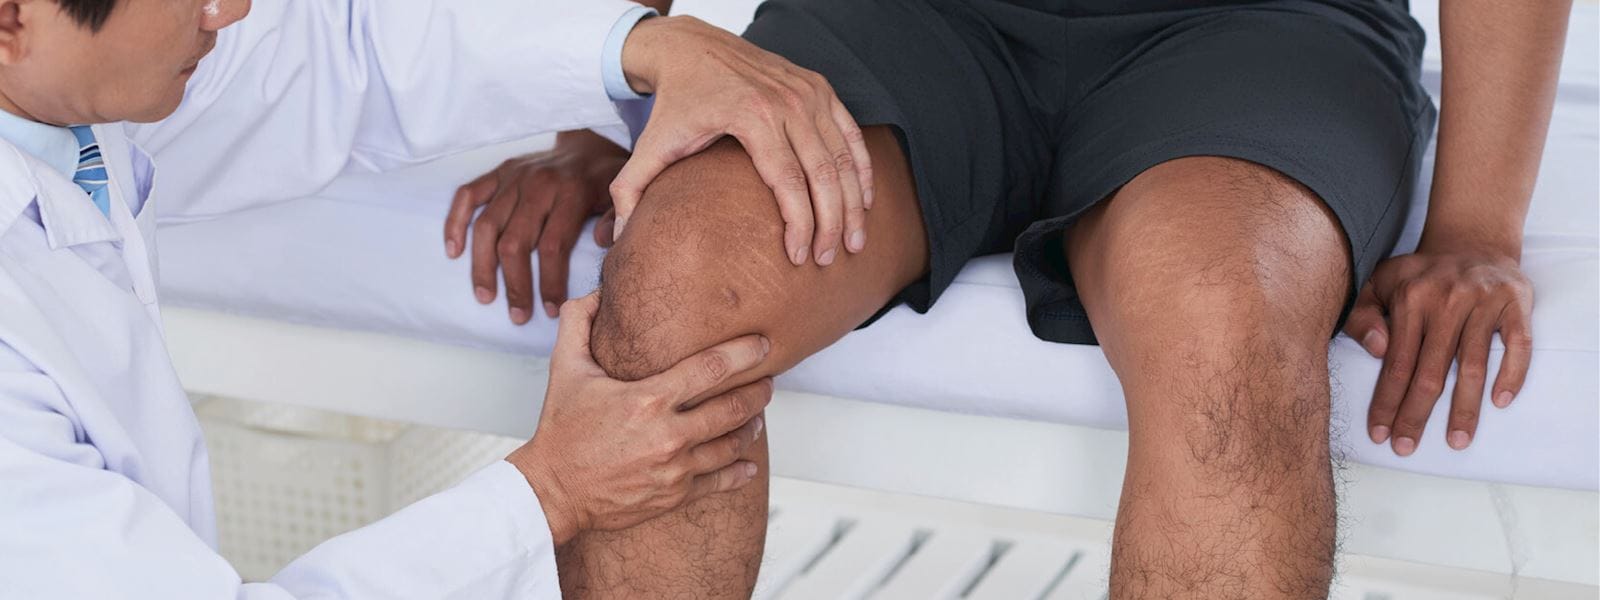 doctor examining a knee joint